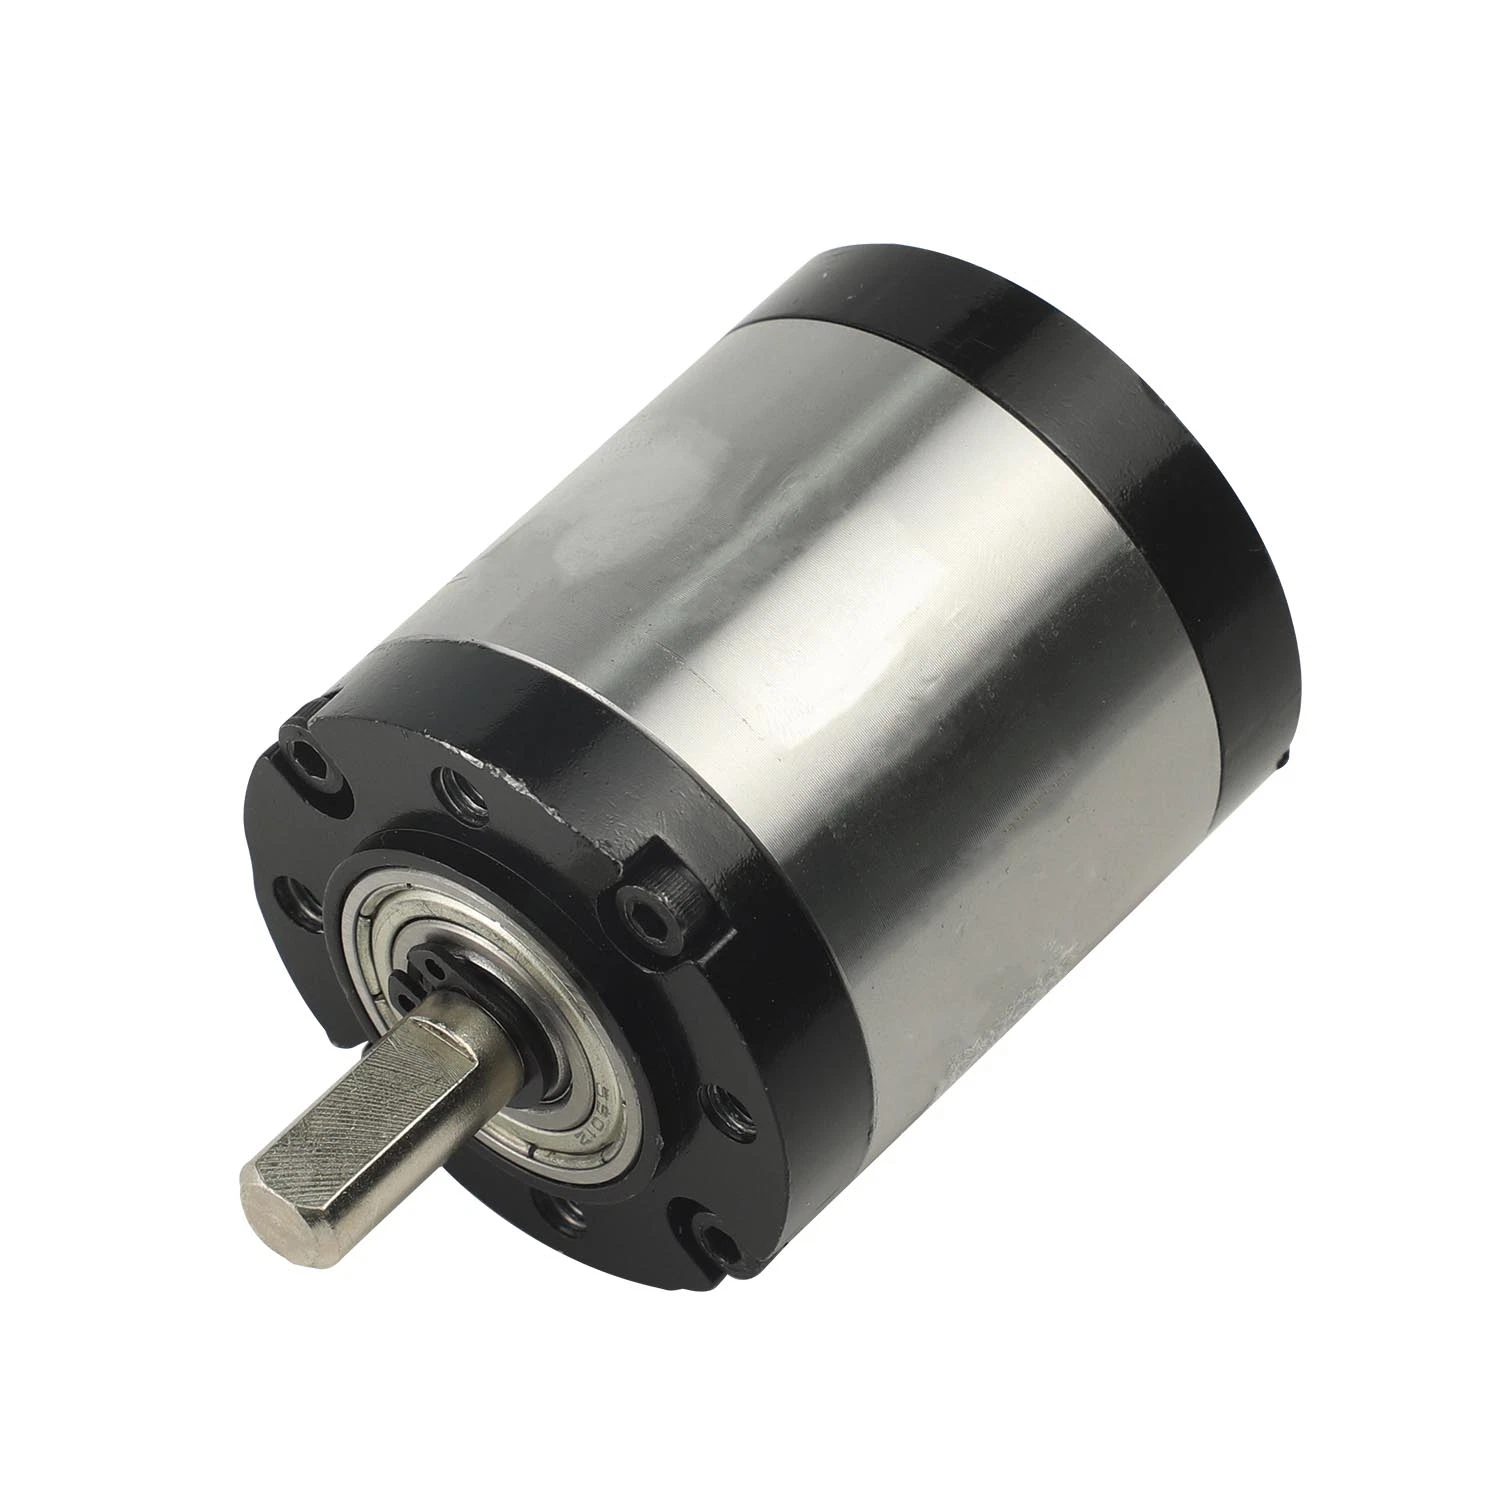 36mm Gear Motor with Planetary Gearbox and Controller